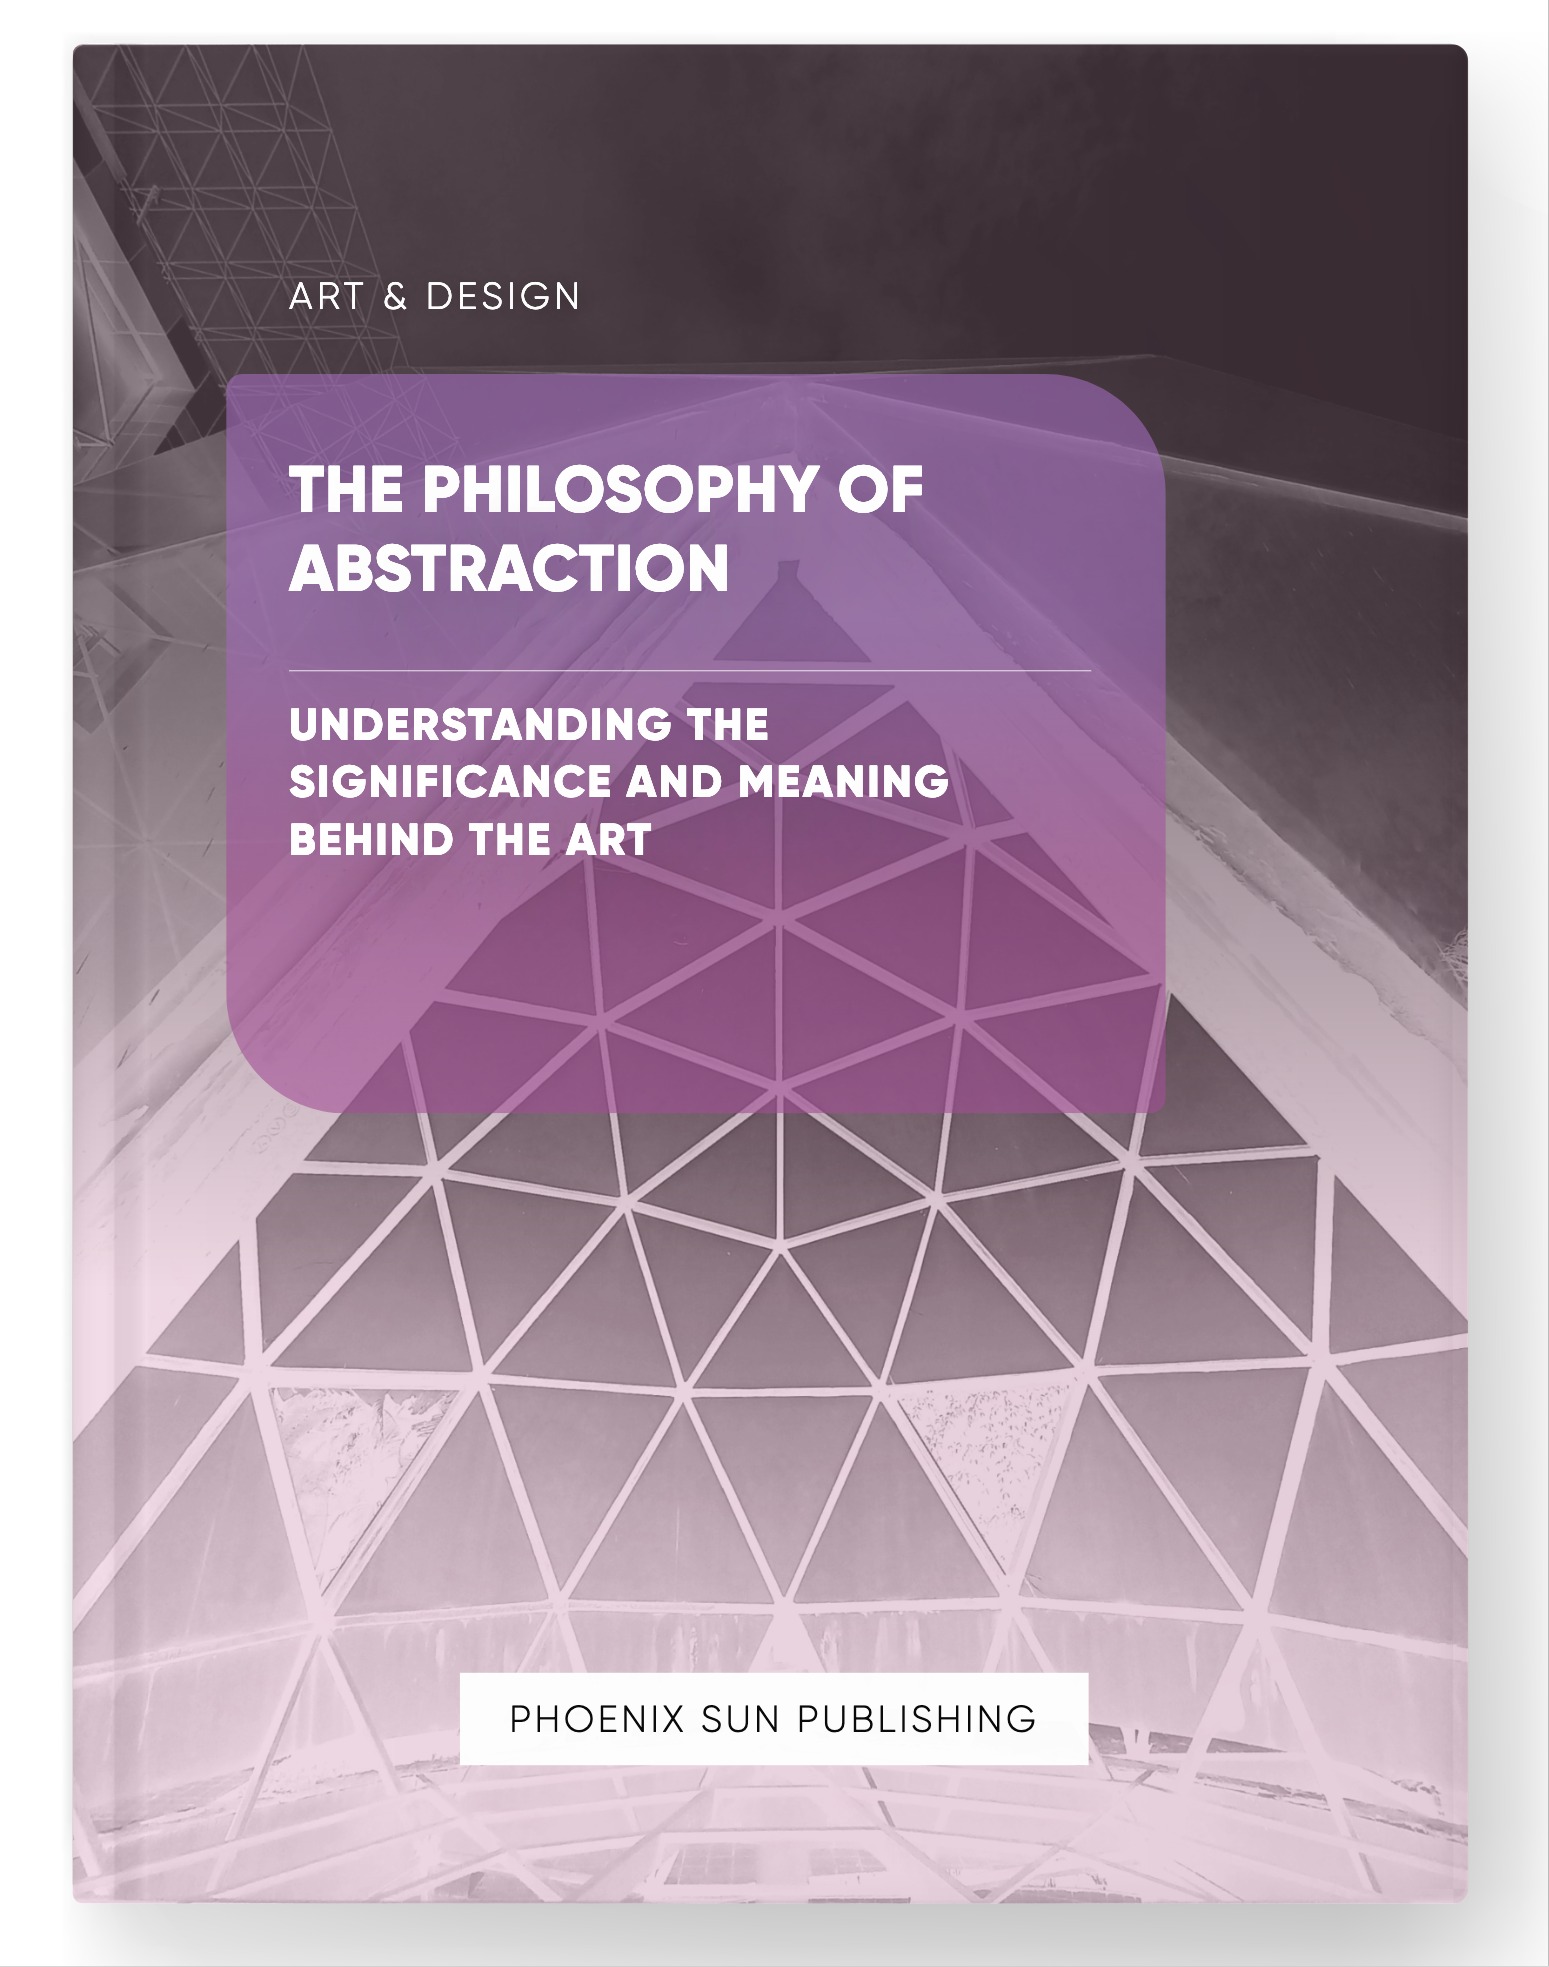 The Philosophy of Abstraction – Understanding the Significance and Meaning Behind the Art